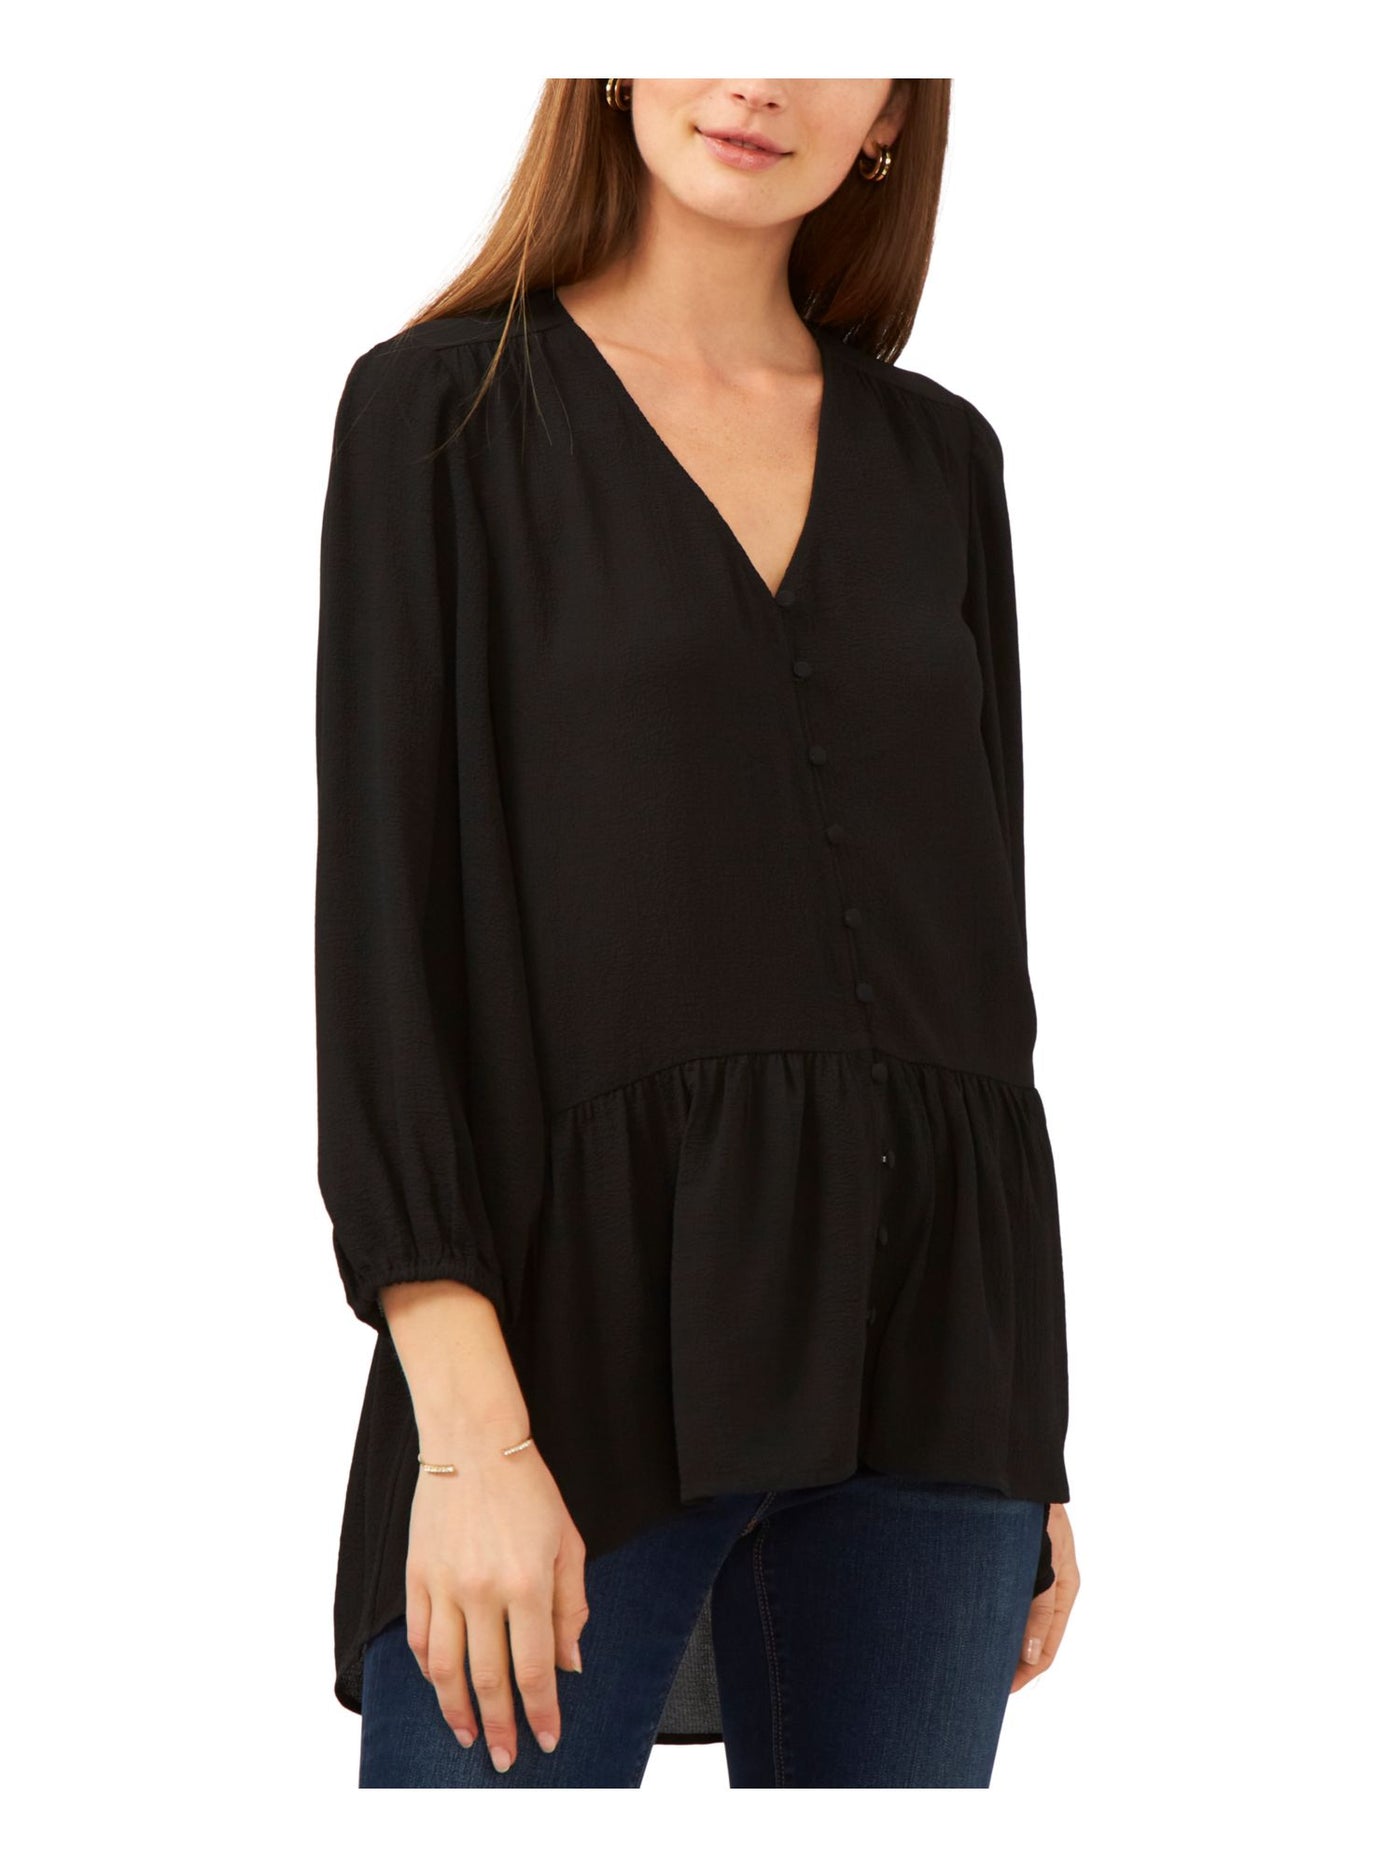 VINCE CAMUTO Womens Black Textured Button Front Ruffled Drop Hem Balloon Sleeve V Neck Tunic Top S